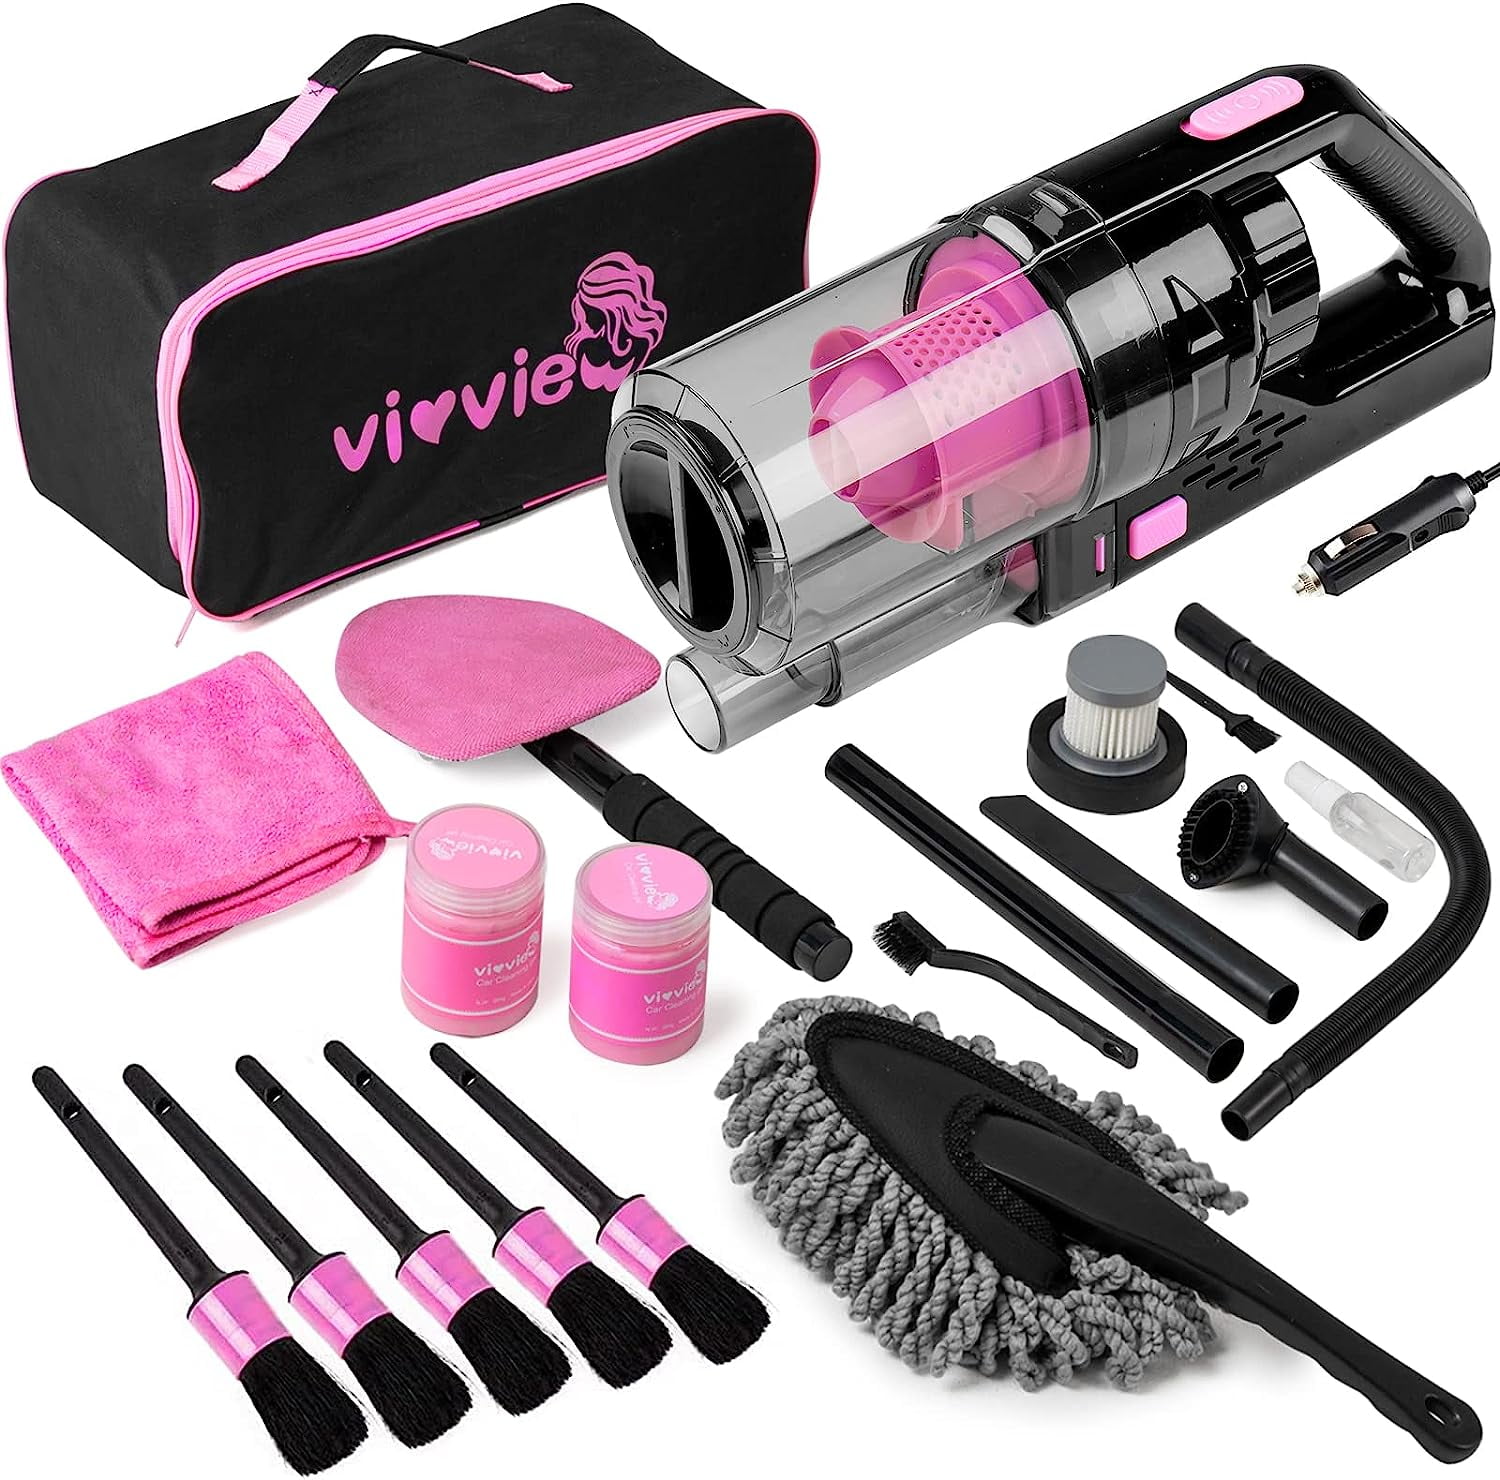 Viewsun 21PCS Car Cleaning Kit, Car Interior Detailing Kit with High Power  Handheld Vacuum, Auto Detailing Drill Brush Set, Cleaning Gel, Complete Car